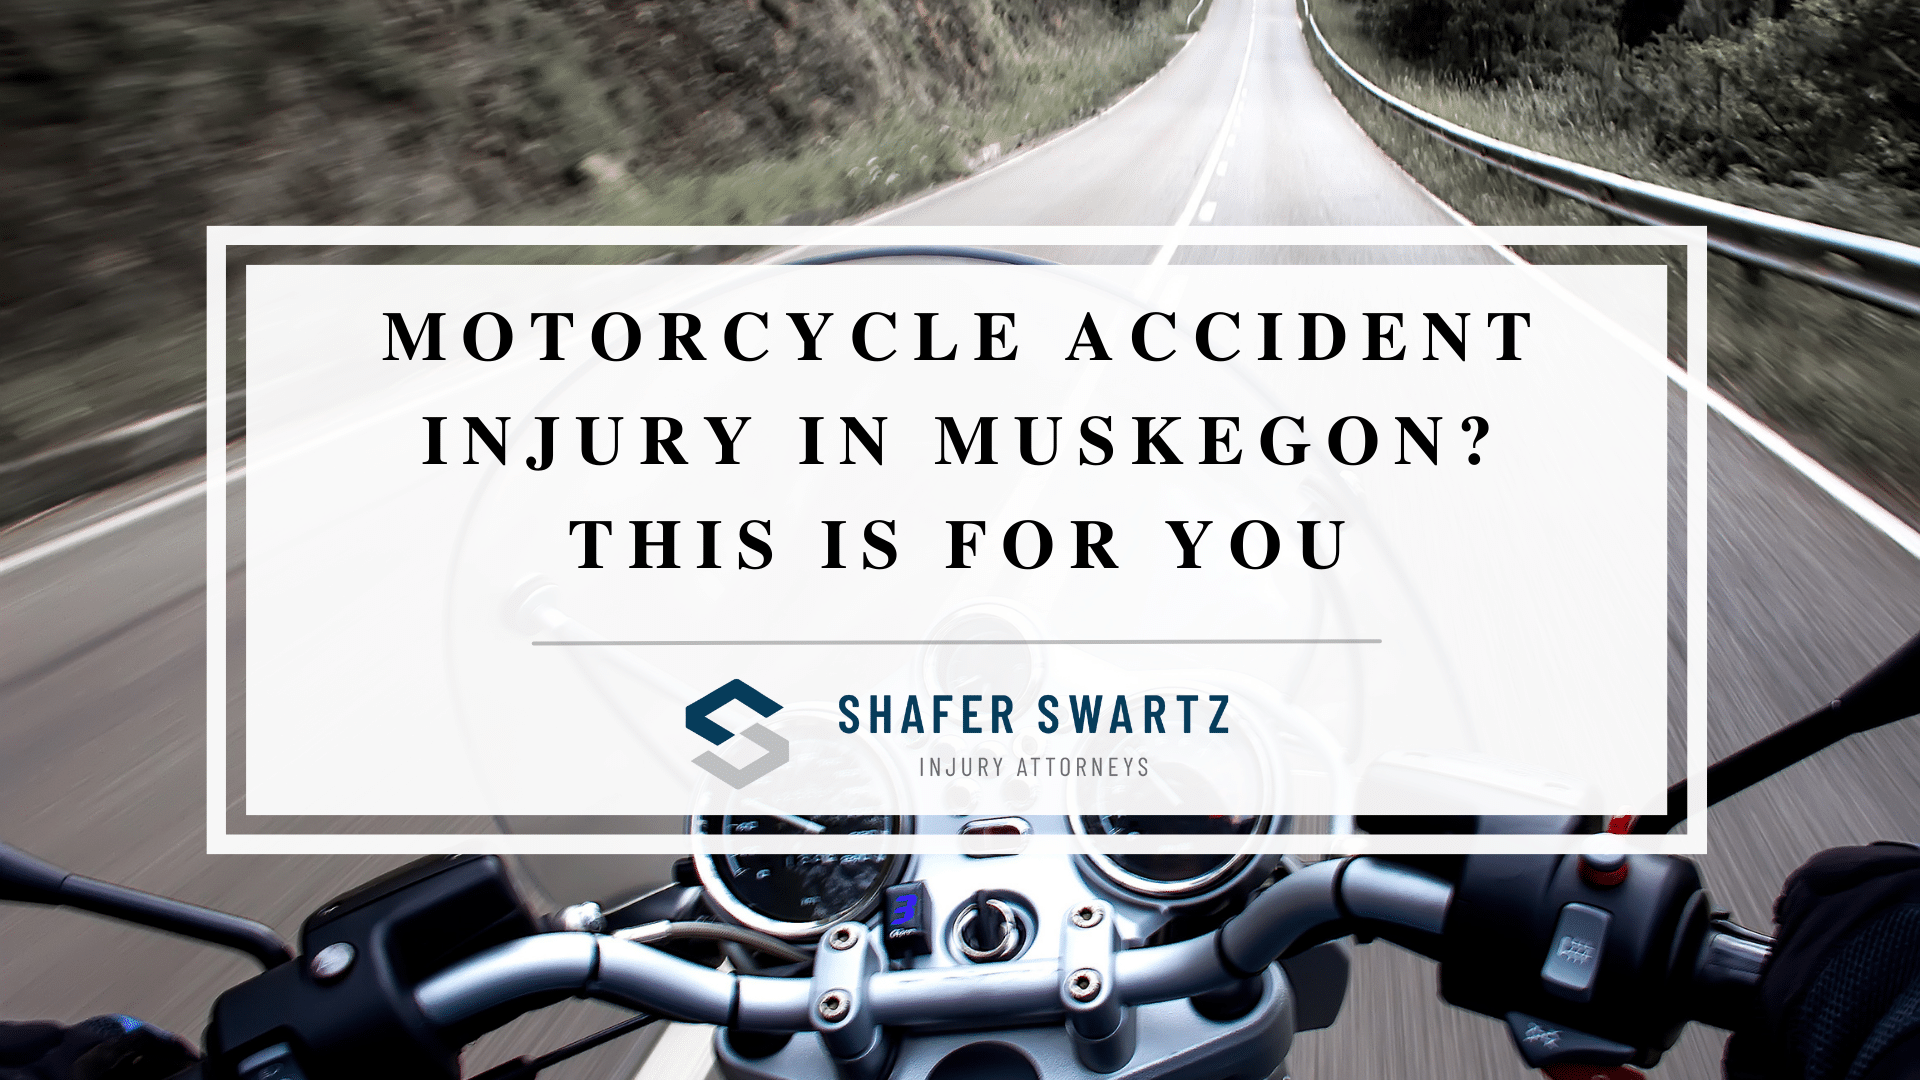 Featured image of Motorcycle Accident Injury in Muskegon? This is for You